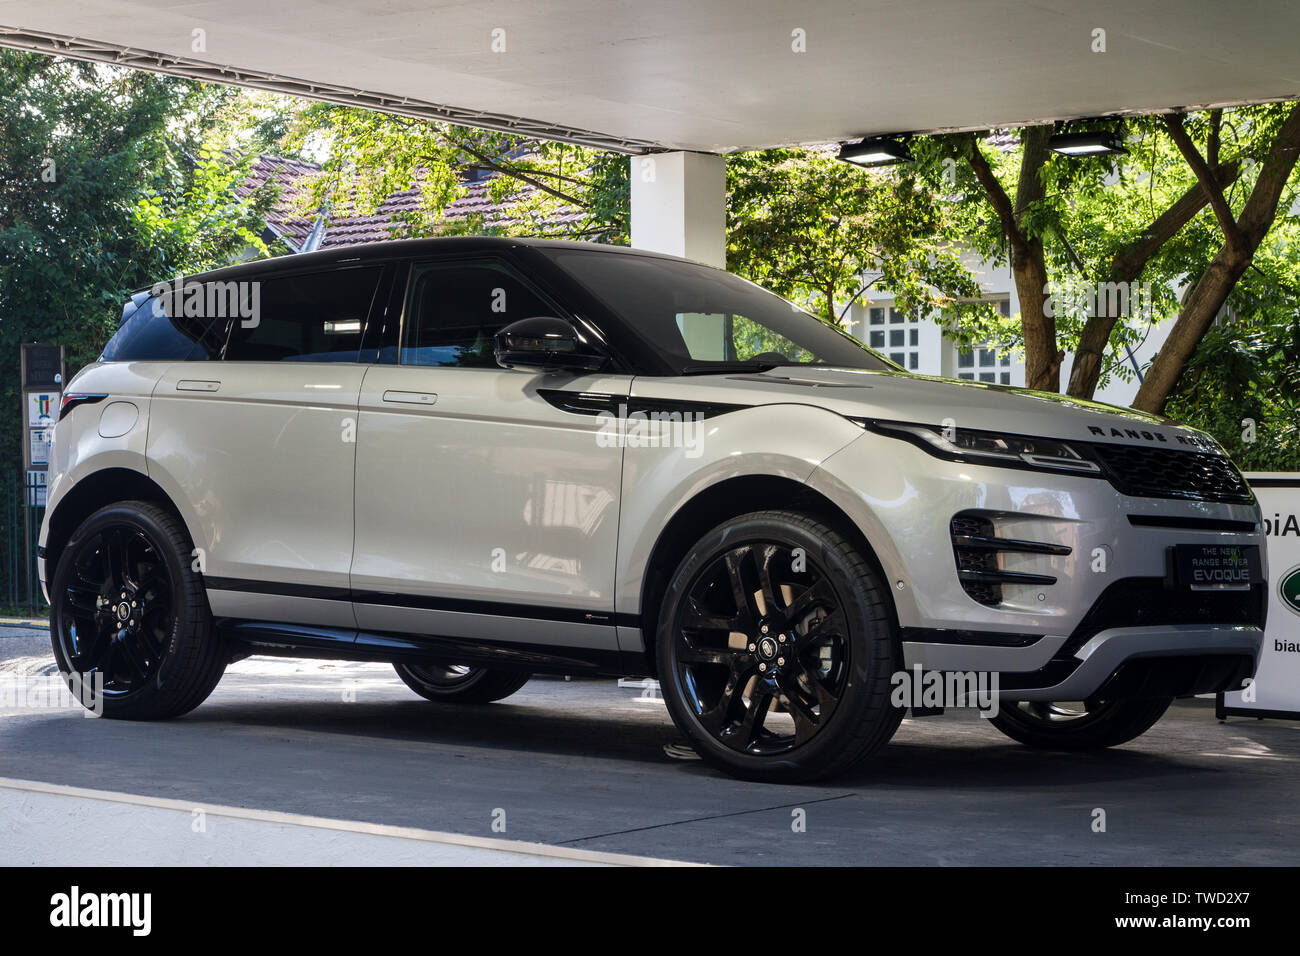 A Range Rover Evoque. 2019 edition of Parco Valentino car show hosts cars by many brands and car designers inside Valentino Park in Torino, Italy. Stock Photo